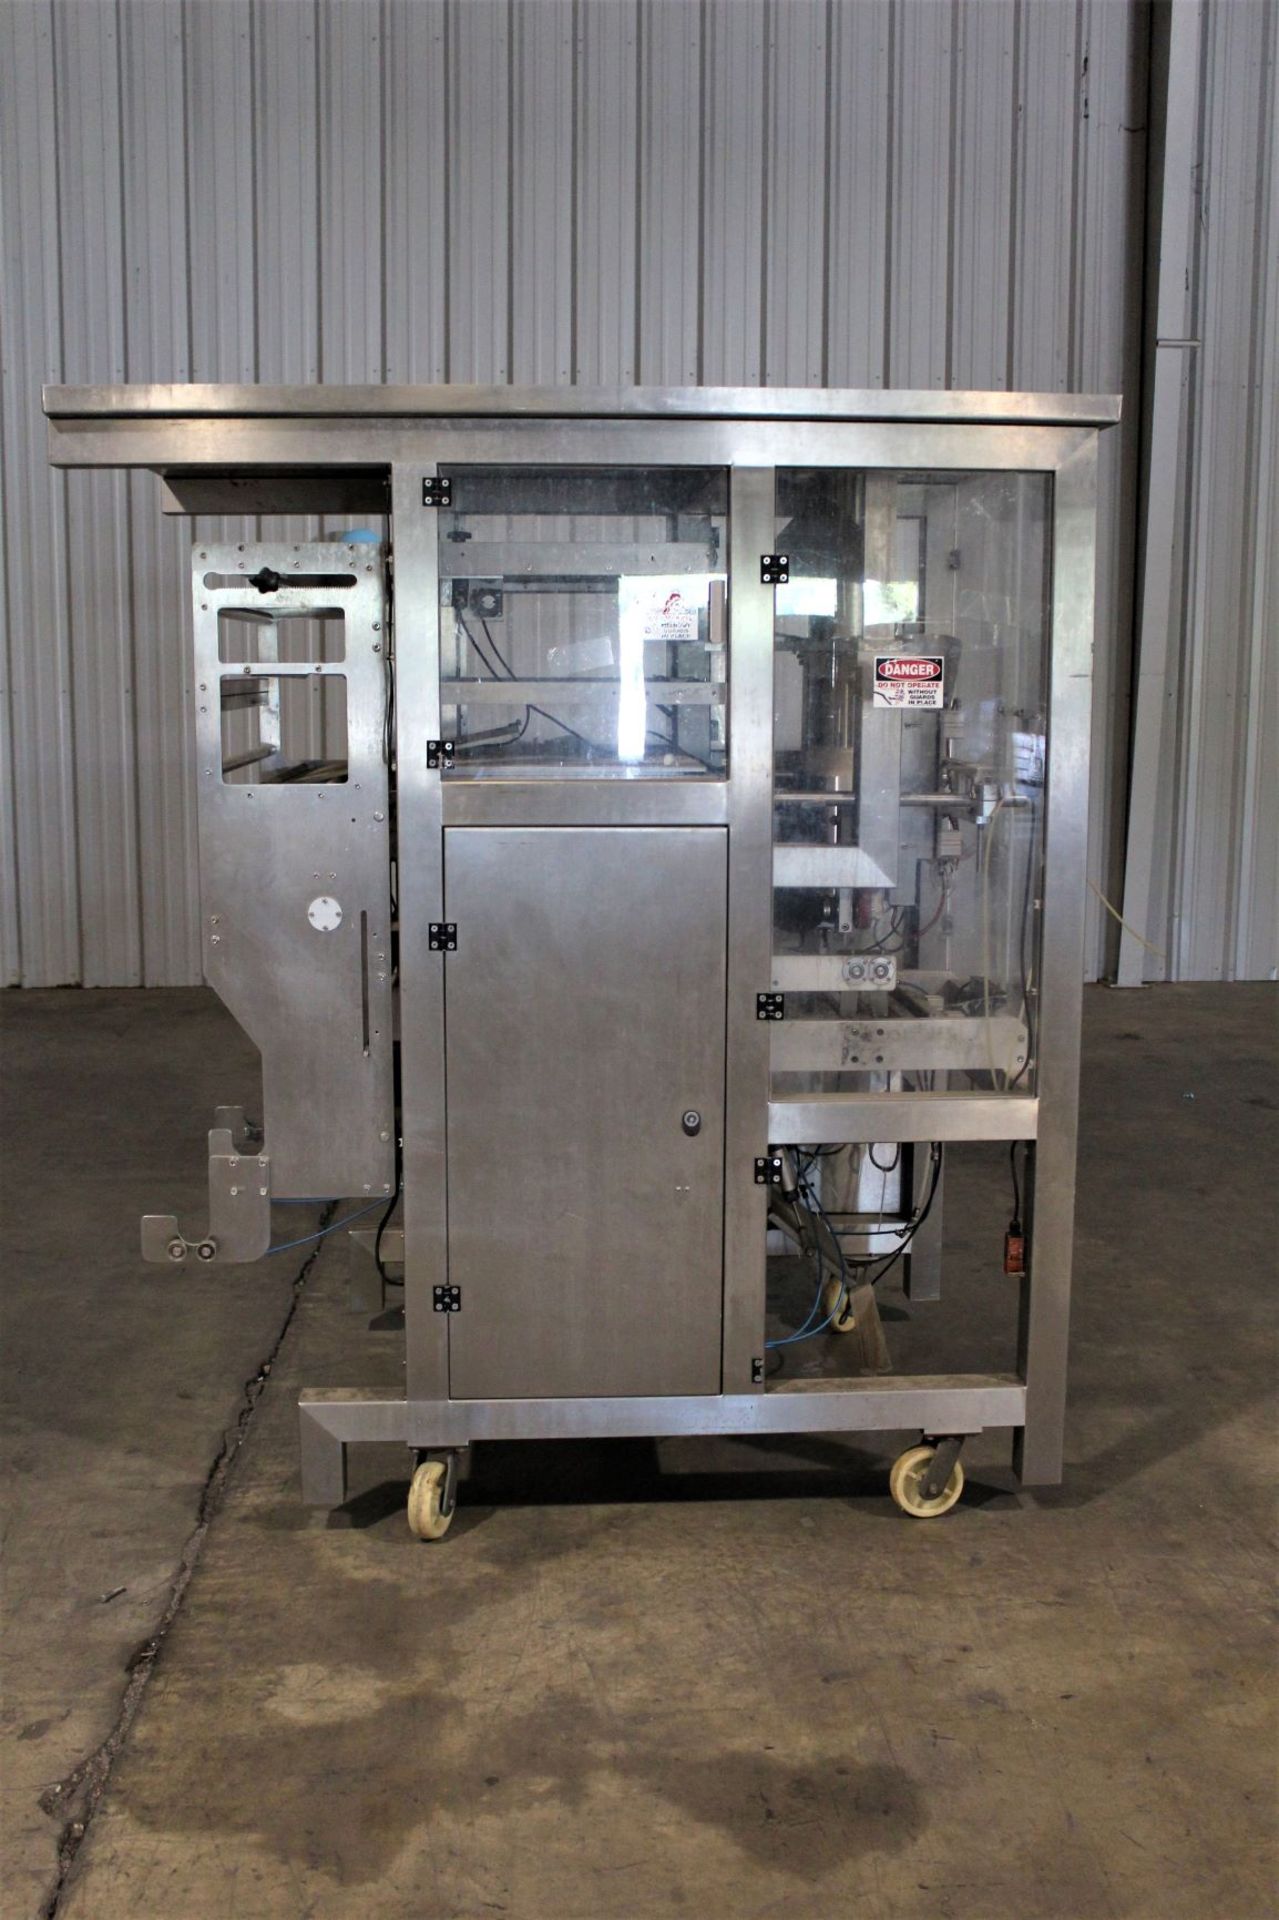 Ohlson Automatic Form Fill & Seal Machine, VFFX Series, Item# bbncohlsonBagvffx, Located in: